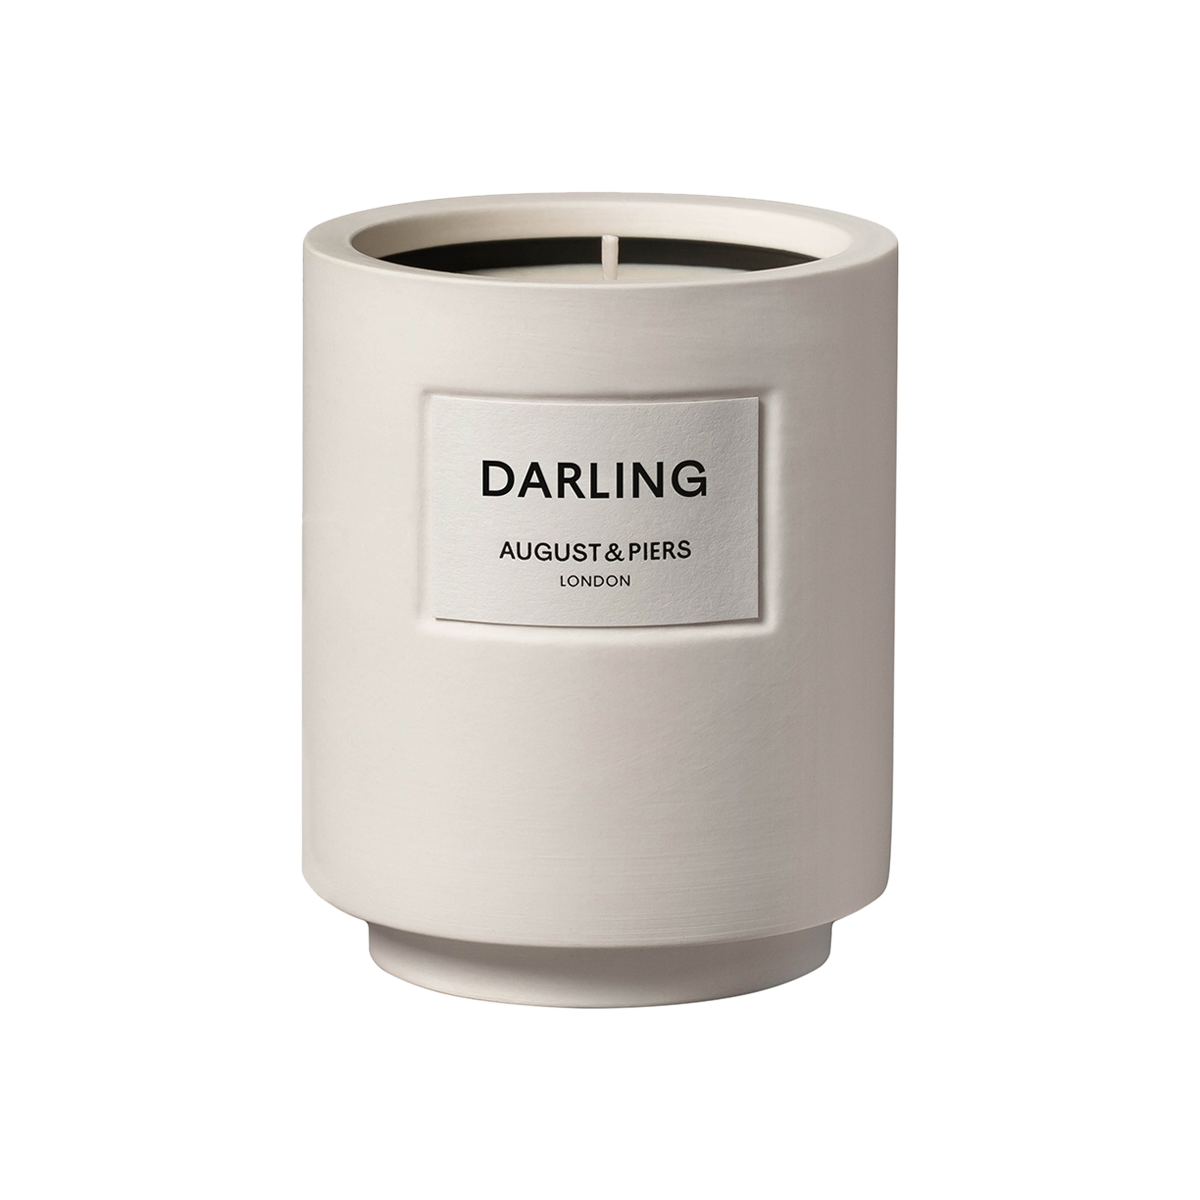 AUGUST&PIERS - Darling Scented Candle